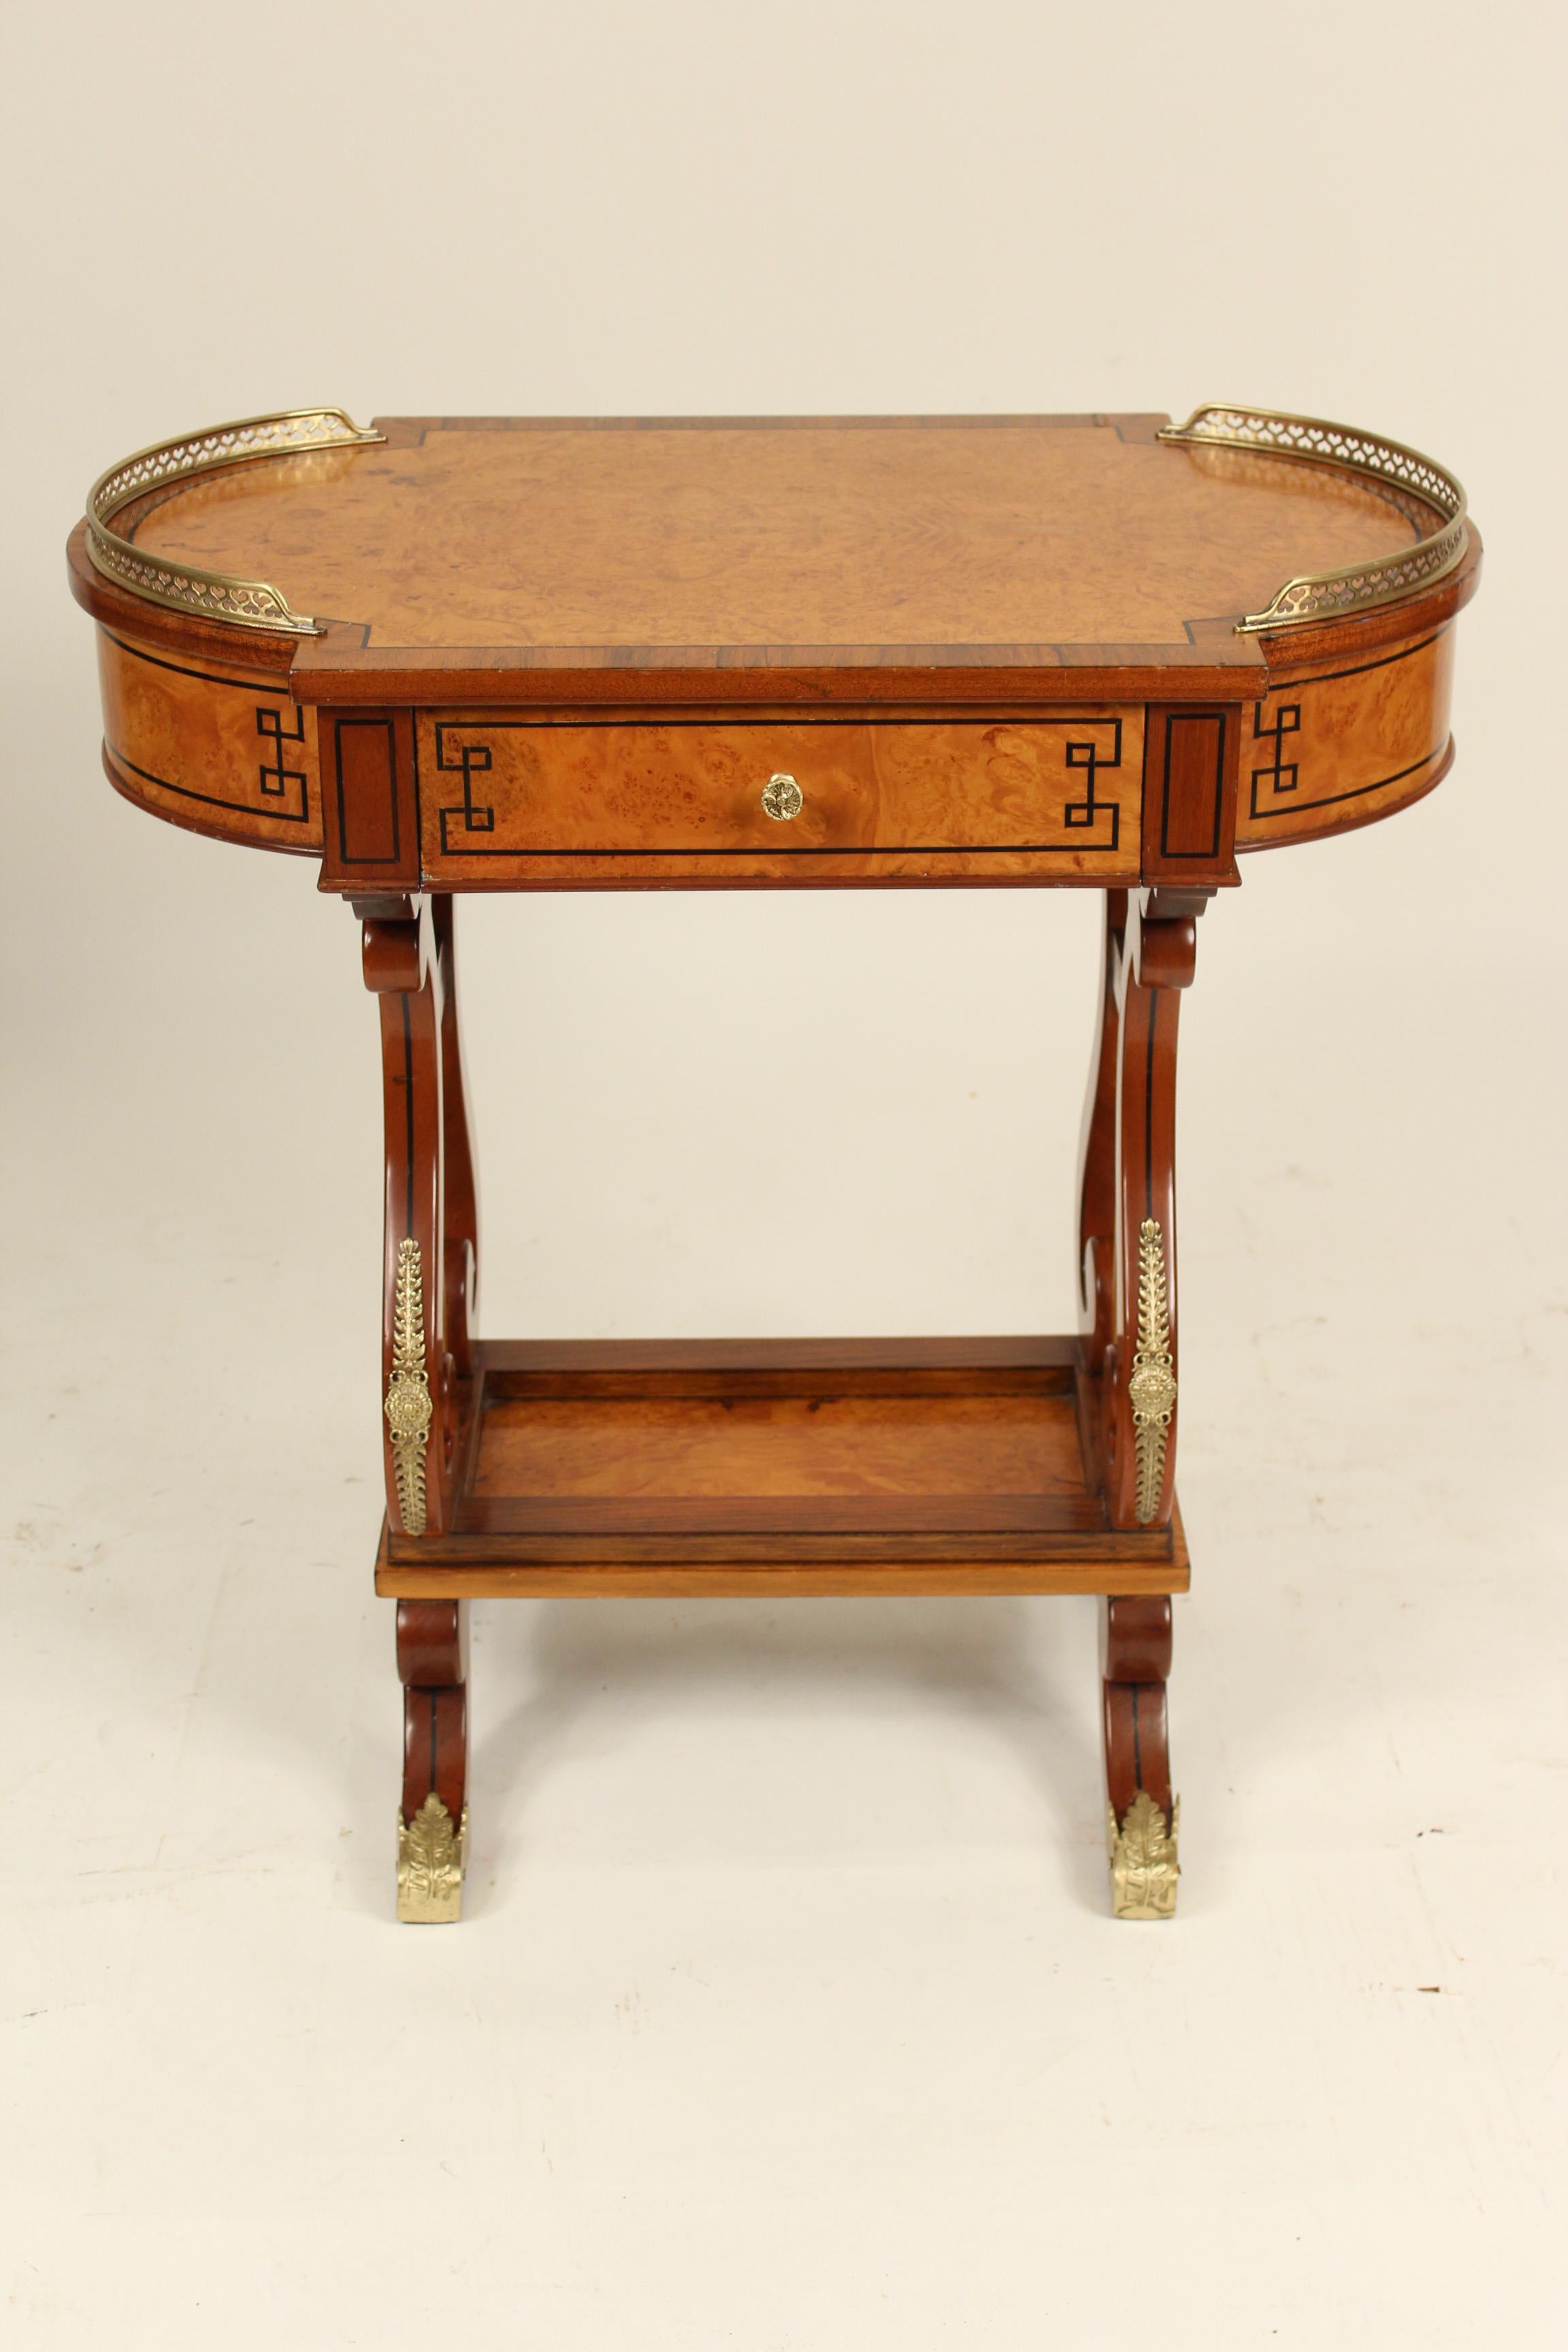 Neoclassical style burl ash and tulip wood single drawer occasional table with brass mounts, circa 1970s. Measure: Surface height 28